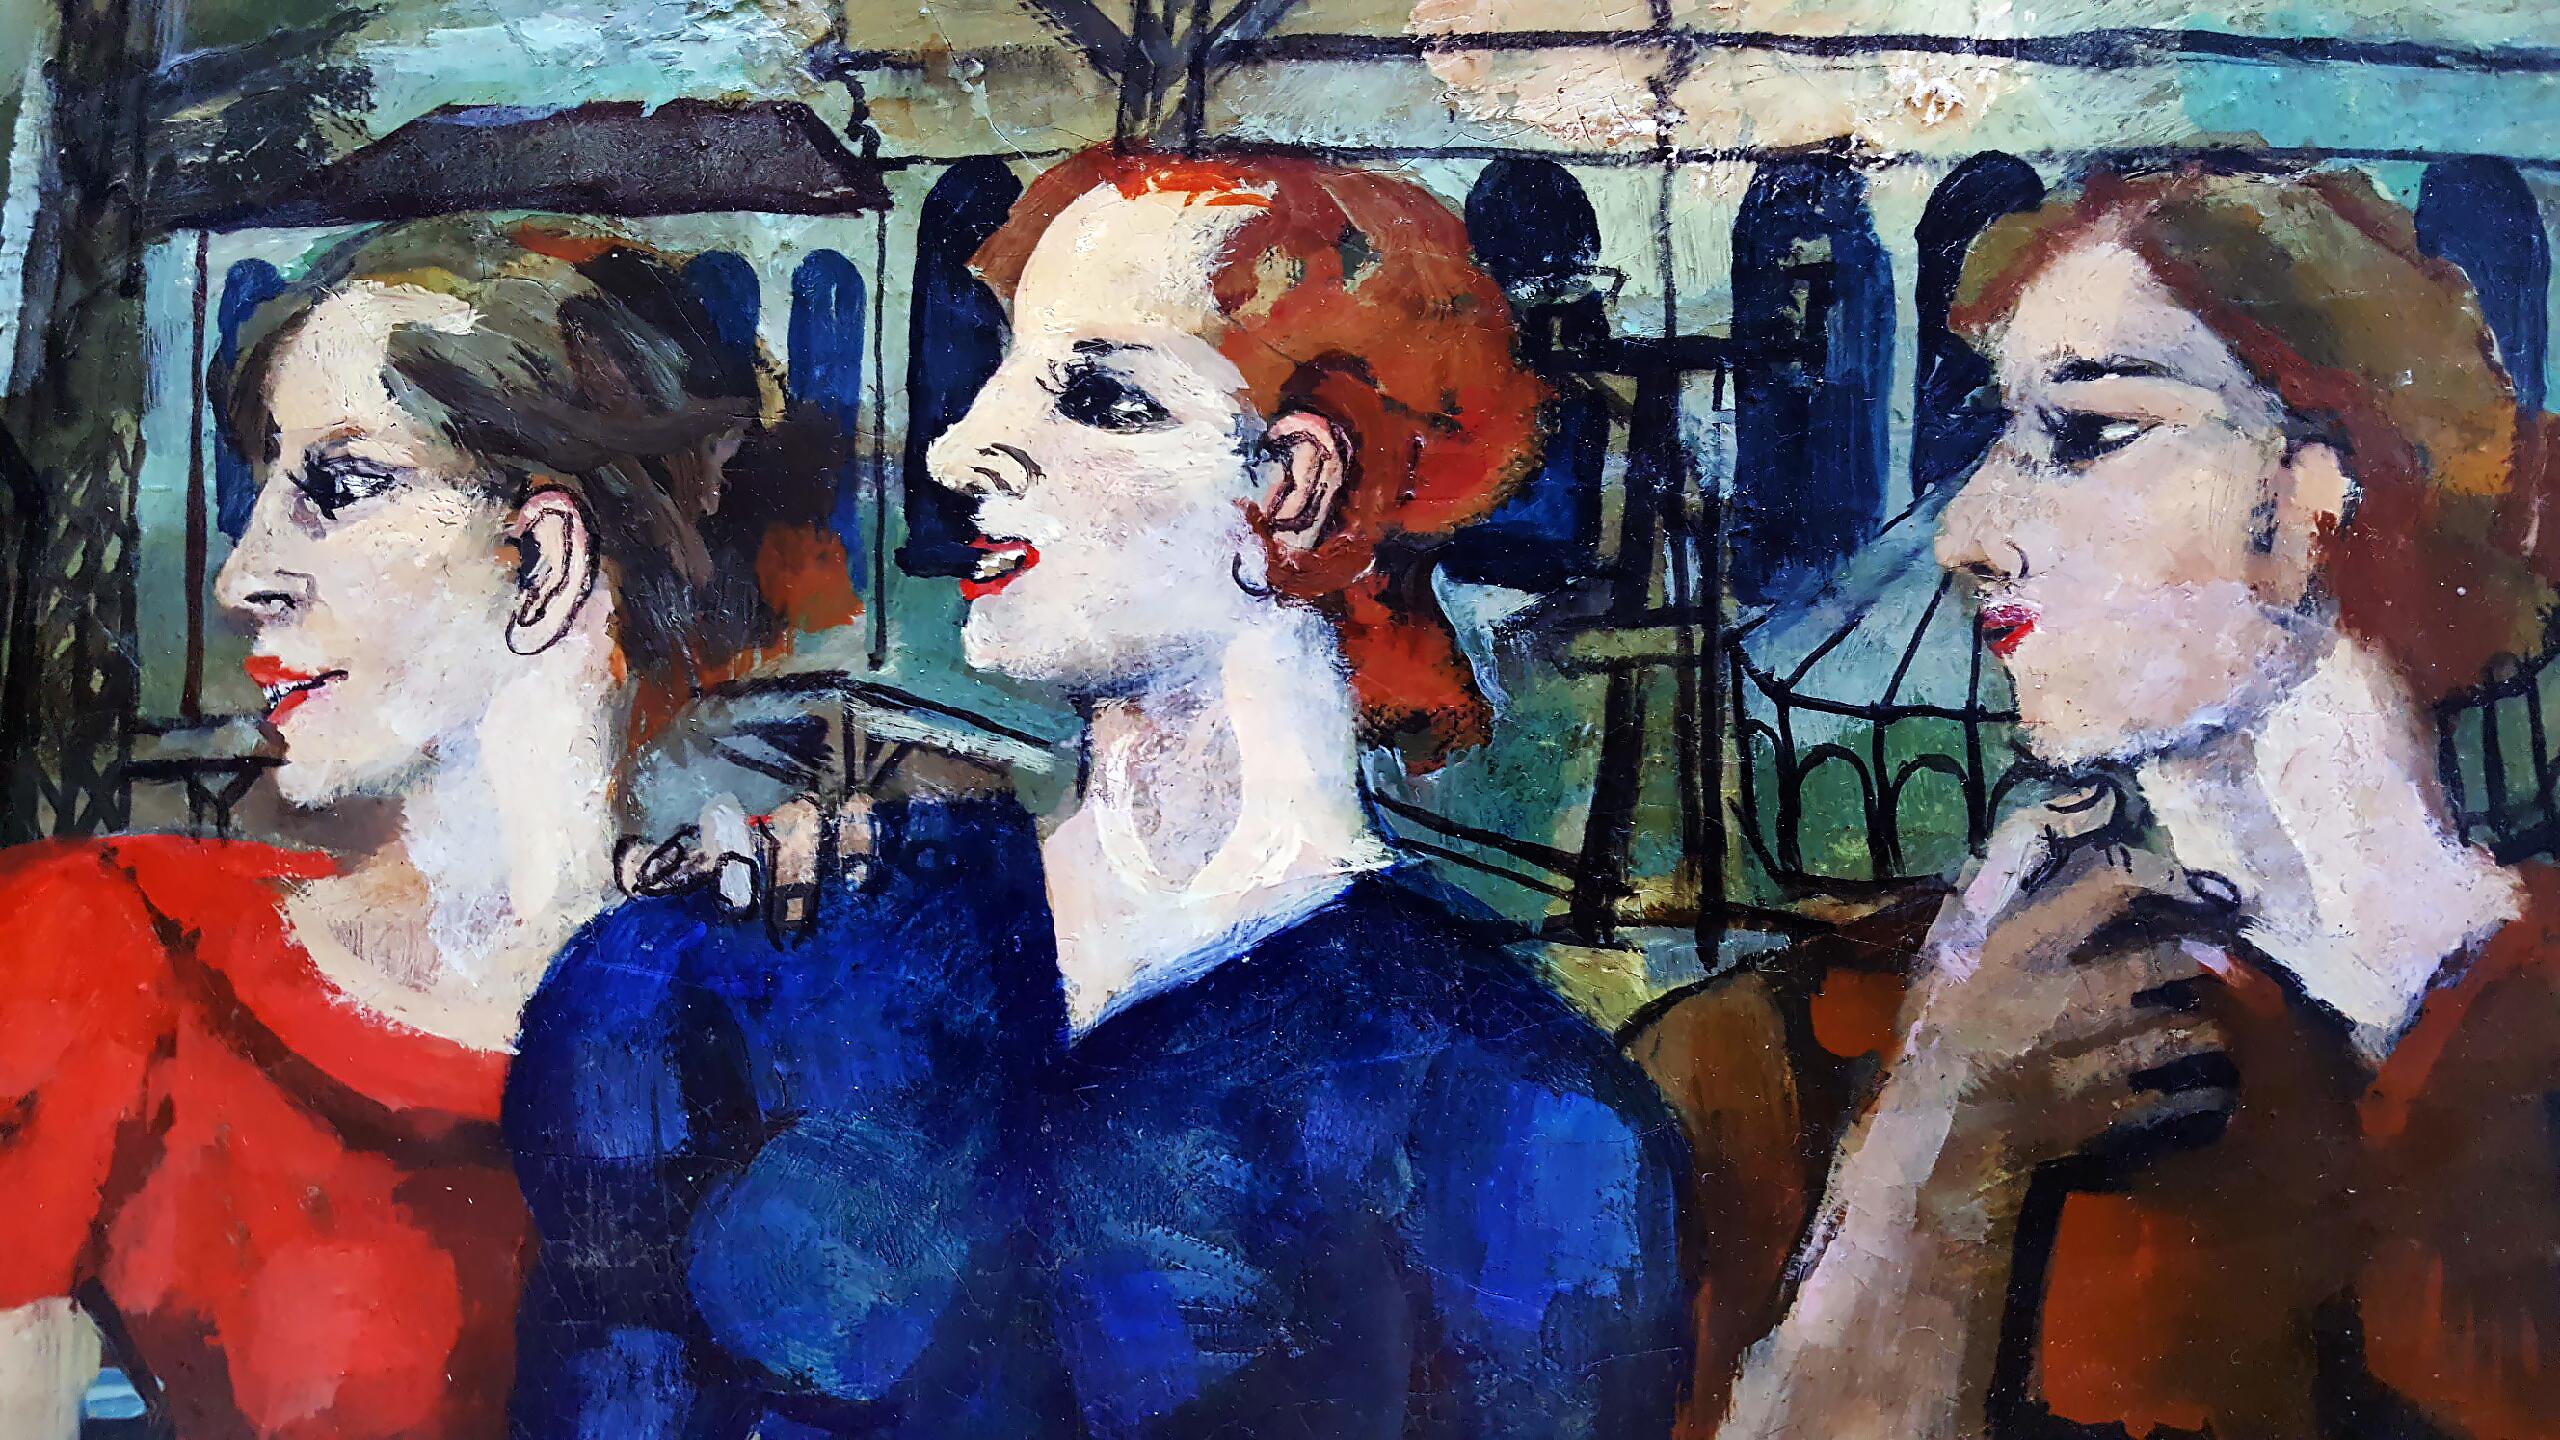 Railroad Men's Wives - Expressionist Painting by Philip Evergood